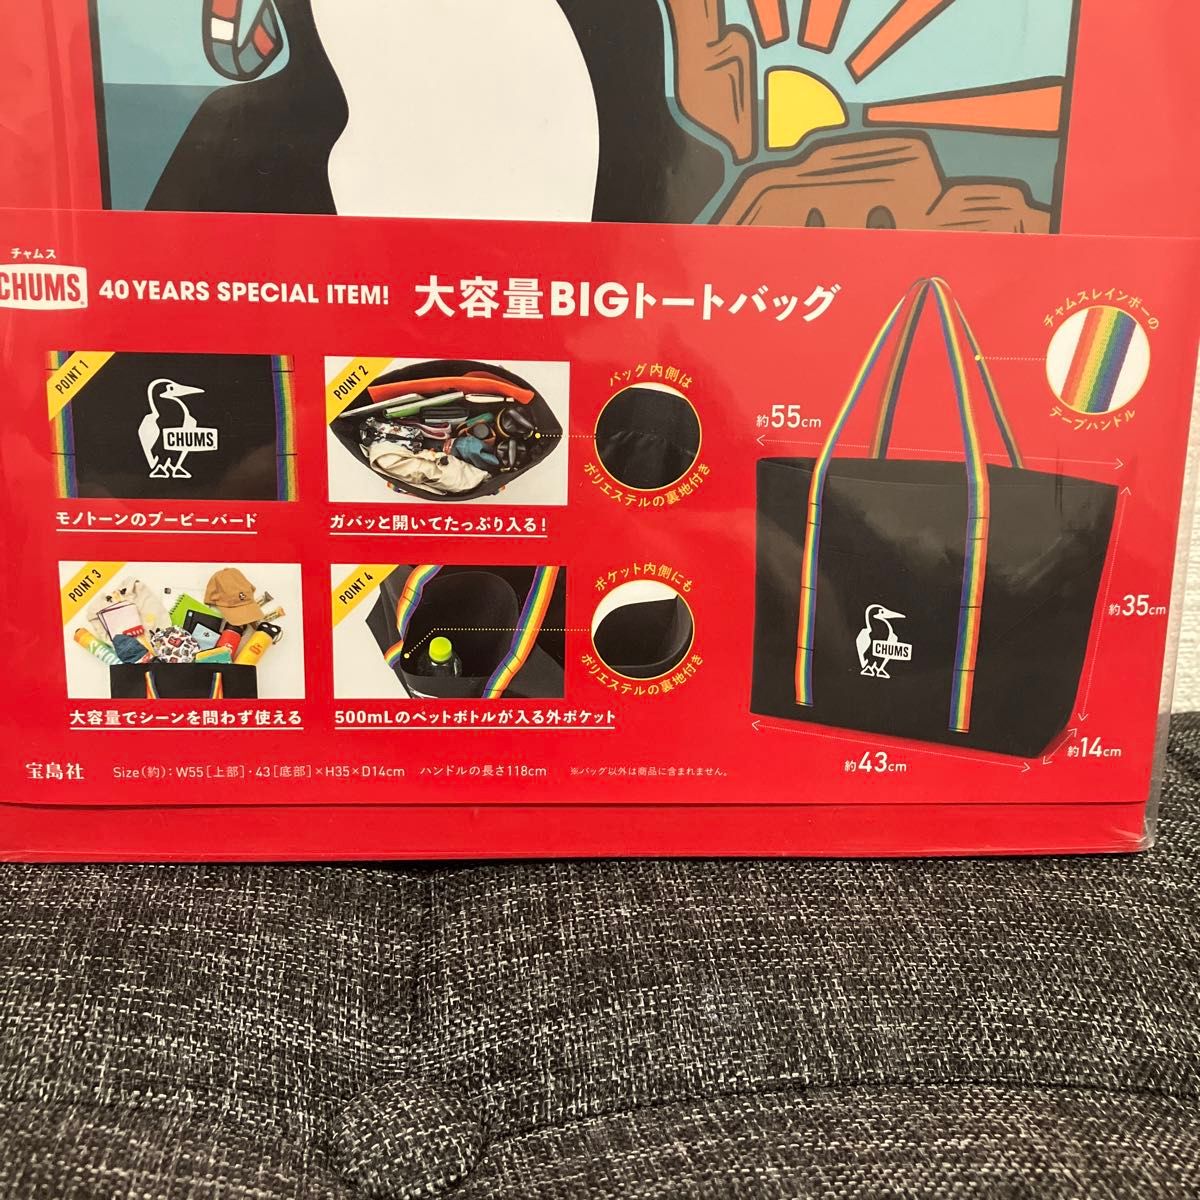 CHUMS 40YEARS ANNIVE CHUMS40周年記念の大容量トートバッグ新品